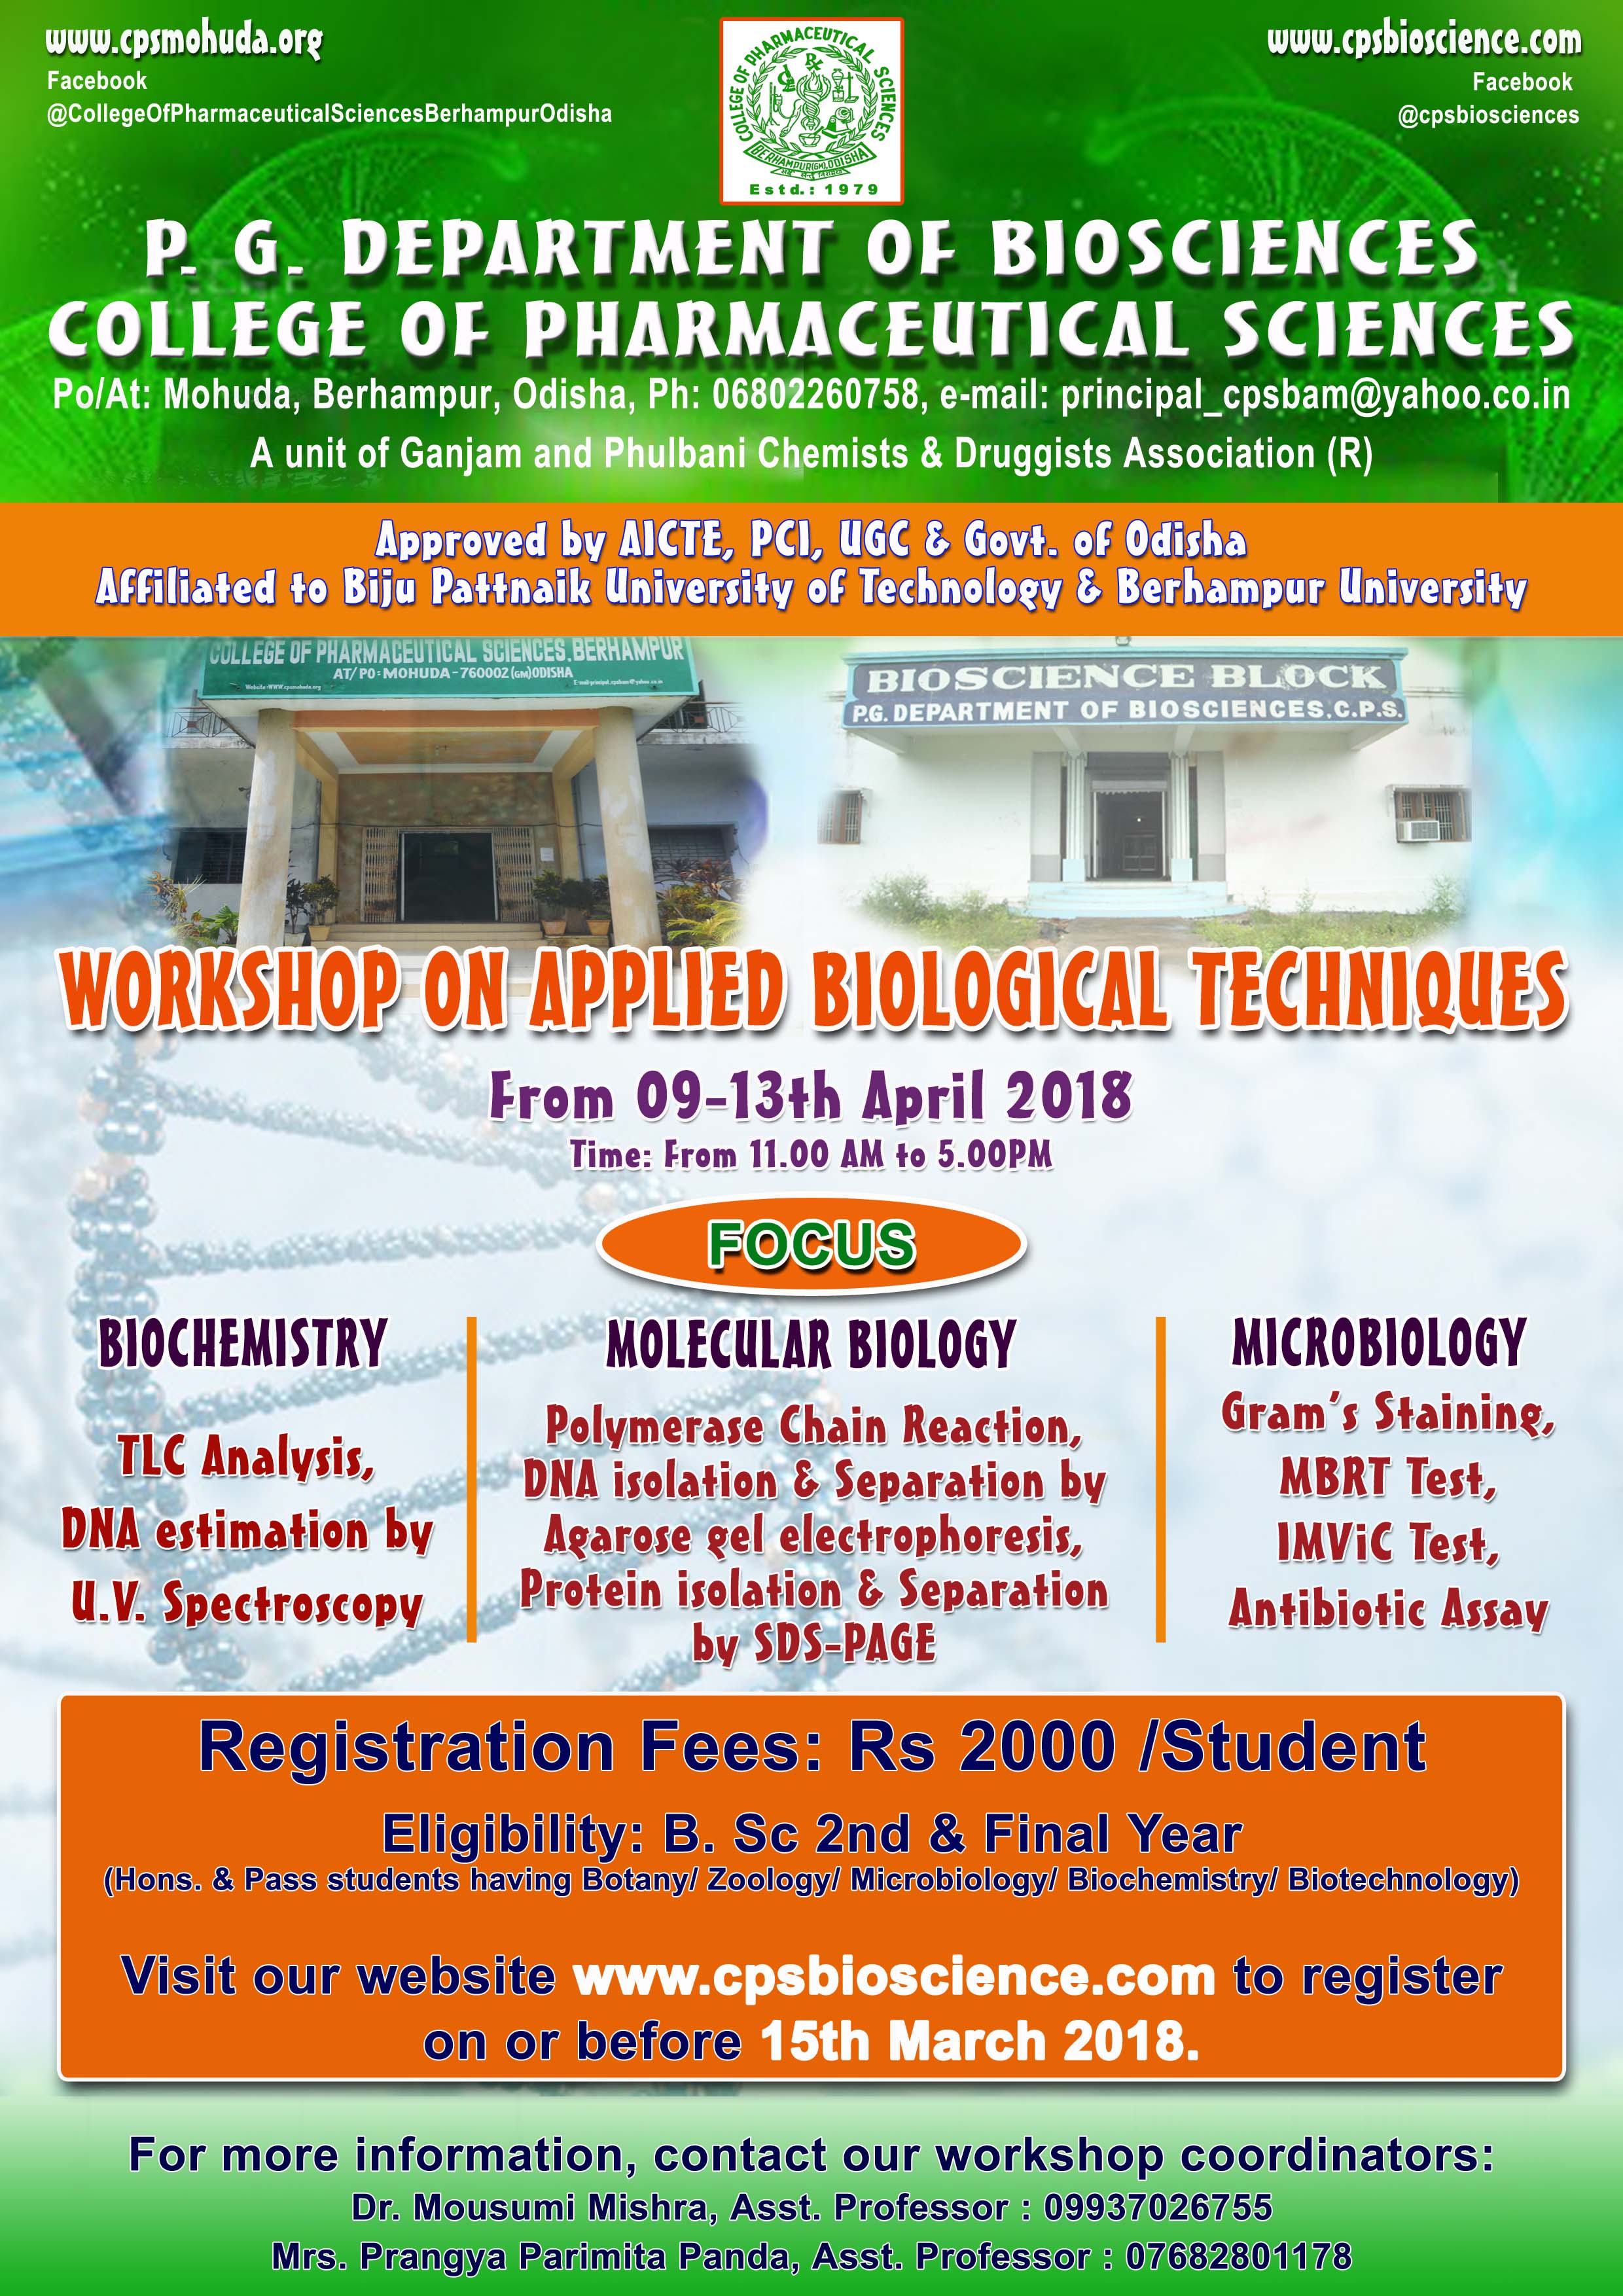 Walk-in for the post of Lecturer on 06.07.2019 WORKSHOP ON APPLIED ...